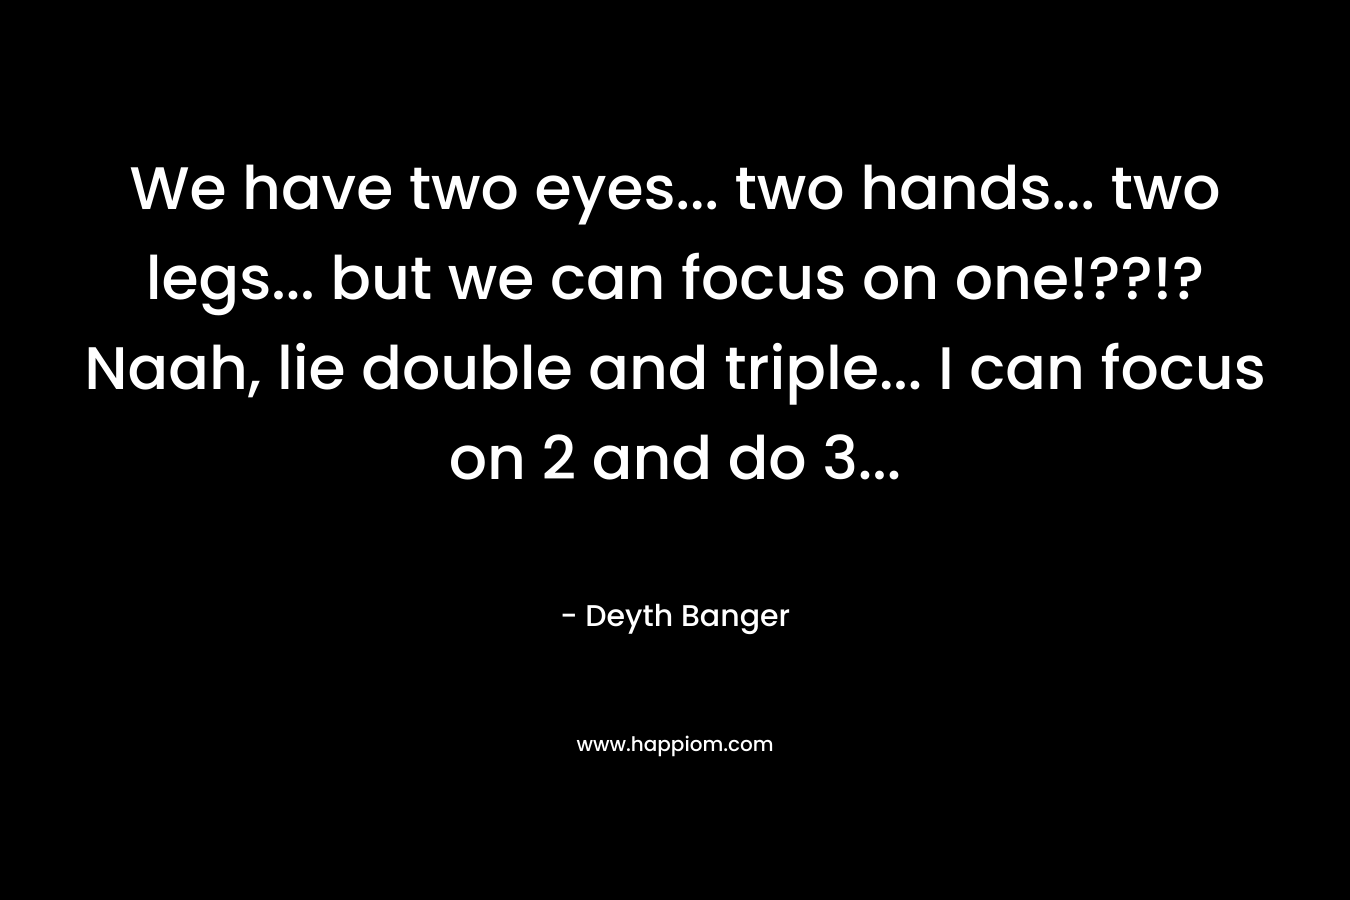 We have two eyes... two hands... two legs... but we can focus on one!??!?Naah, lie double and triple... I can focus on 2 and do 3...